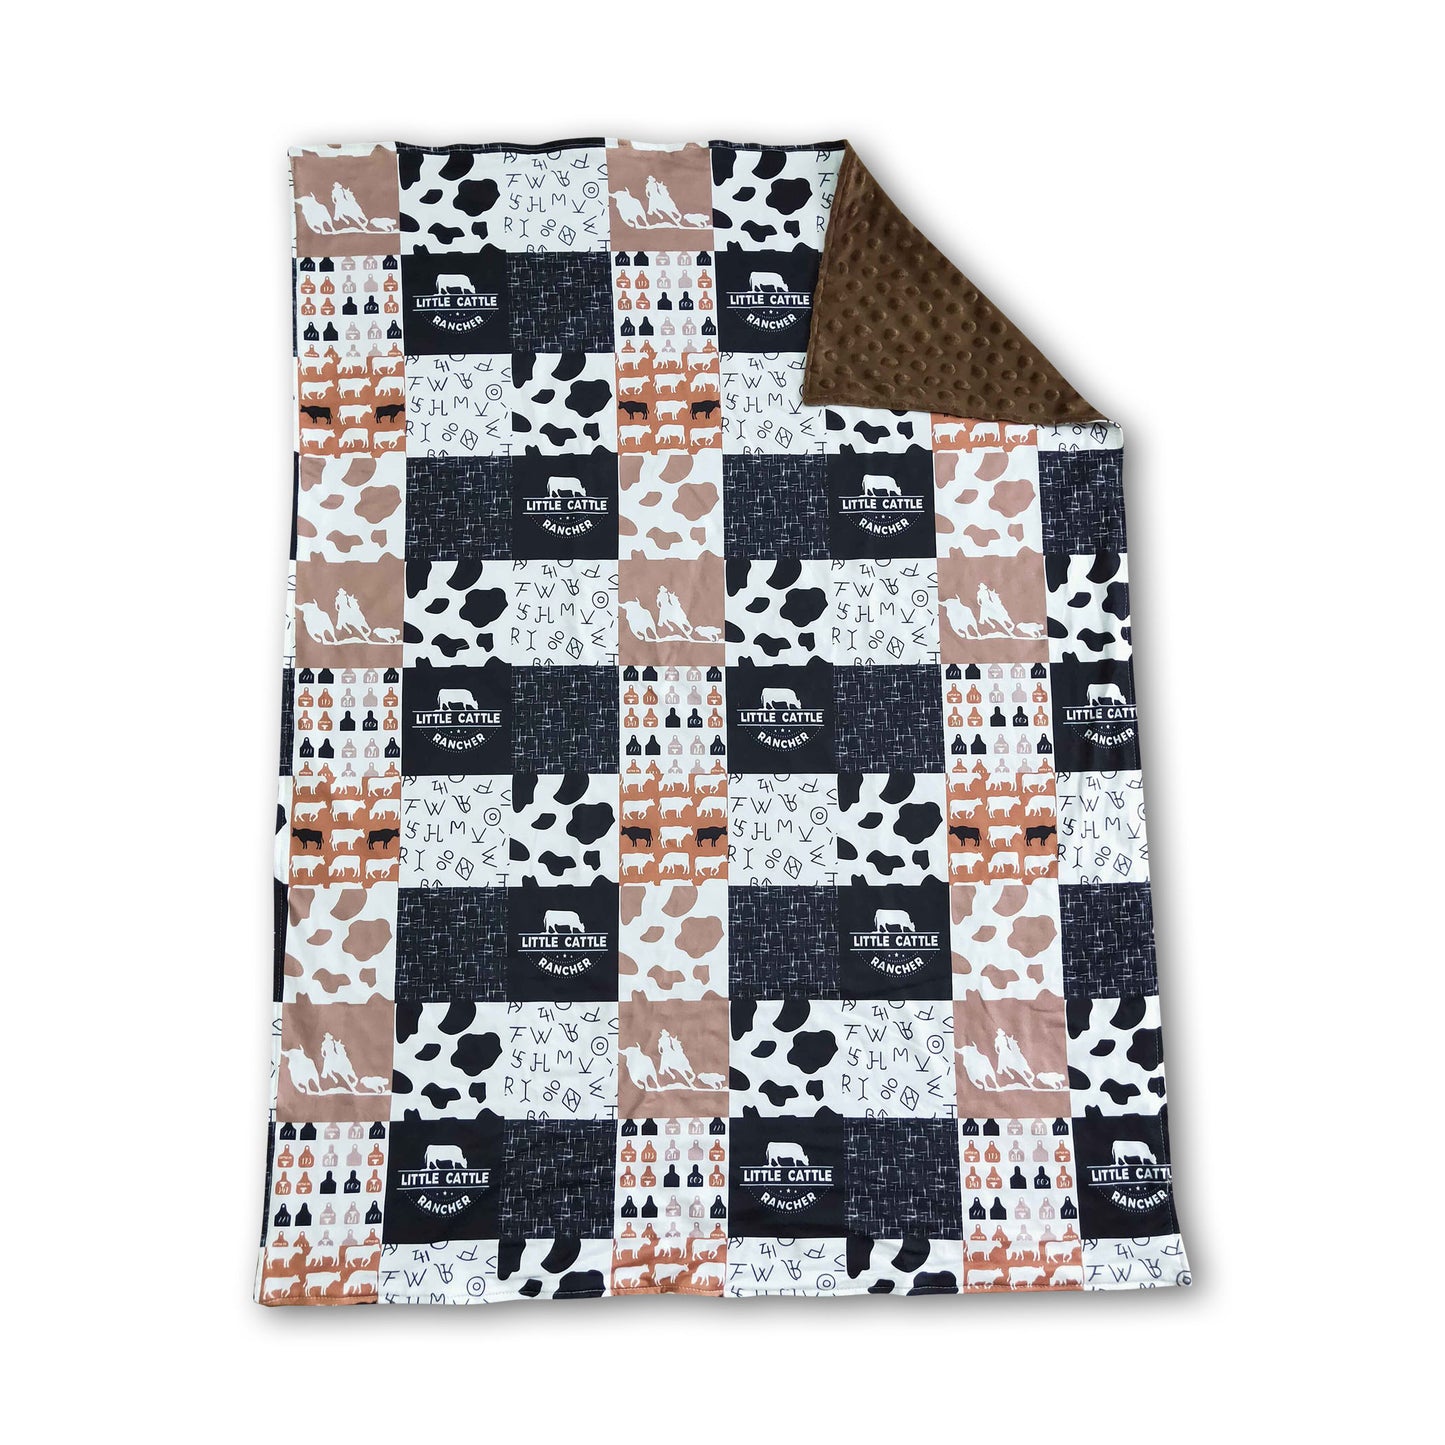 Hello Cattle brown polka dots baby blankets